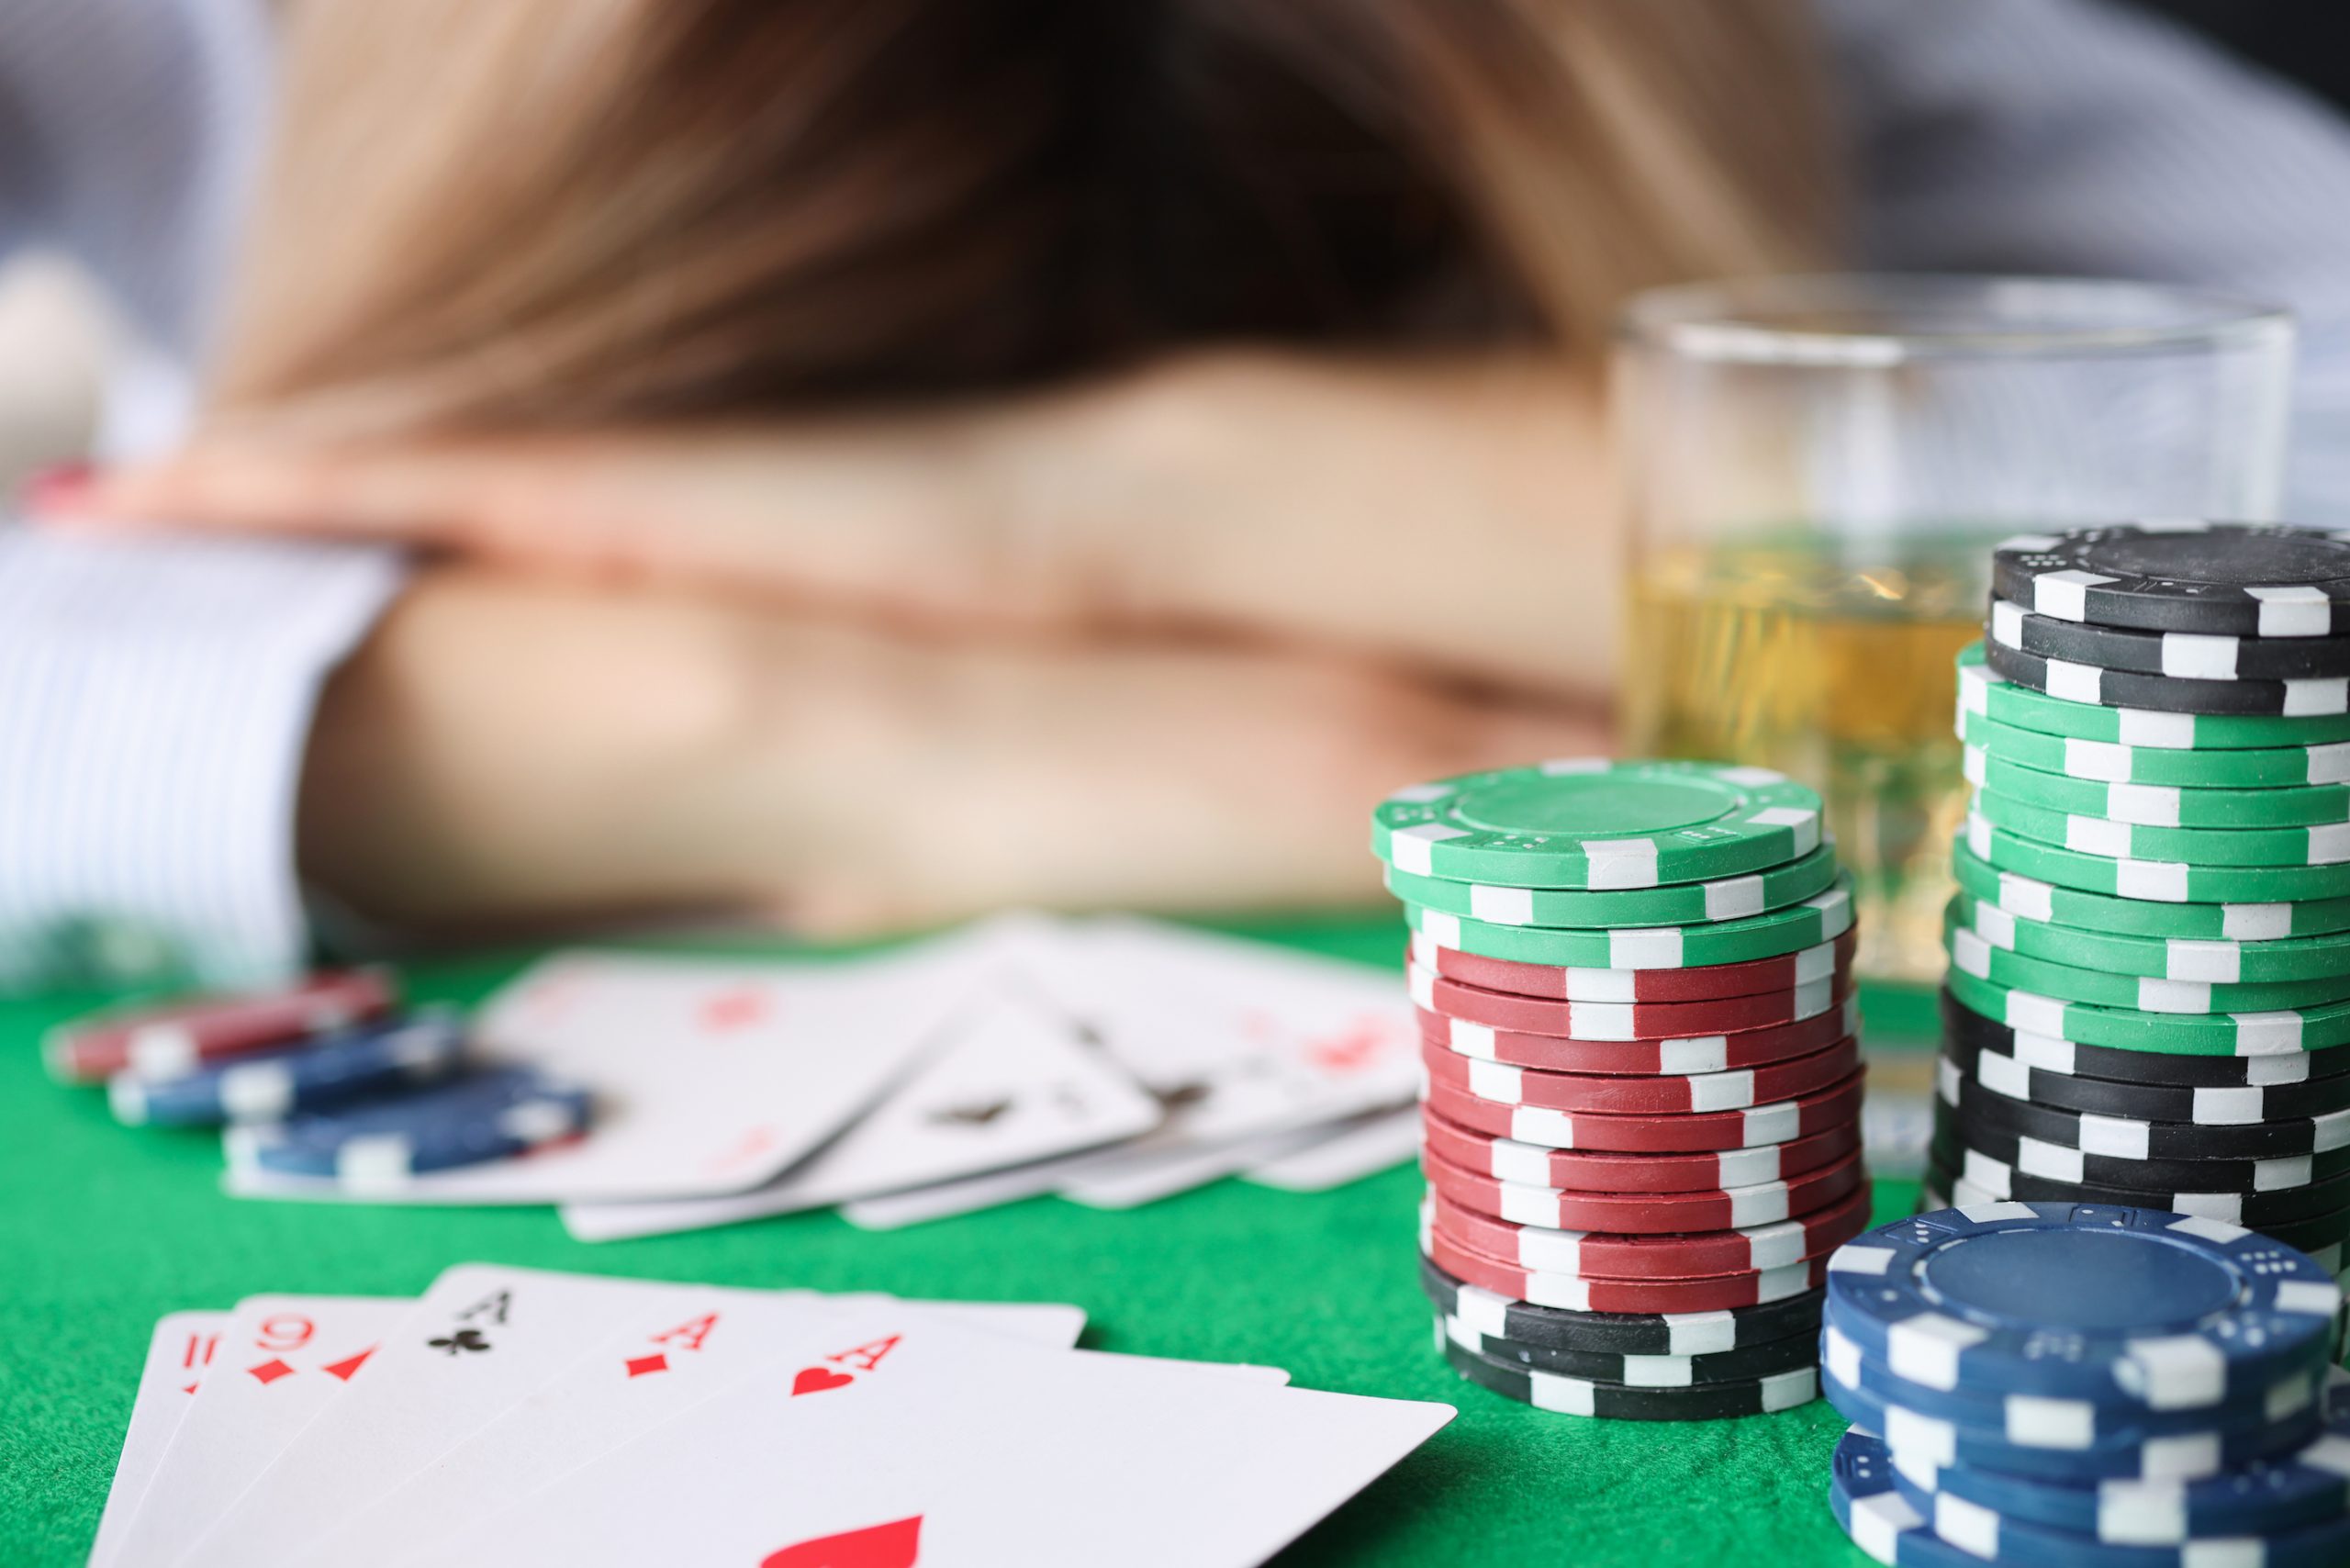 The Relationship Anxiety Has With Addiction Similar to Gambling